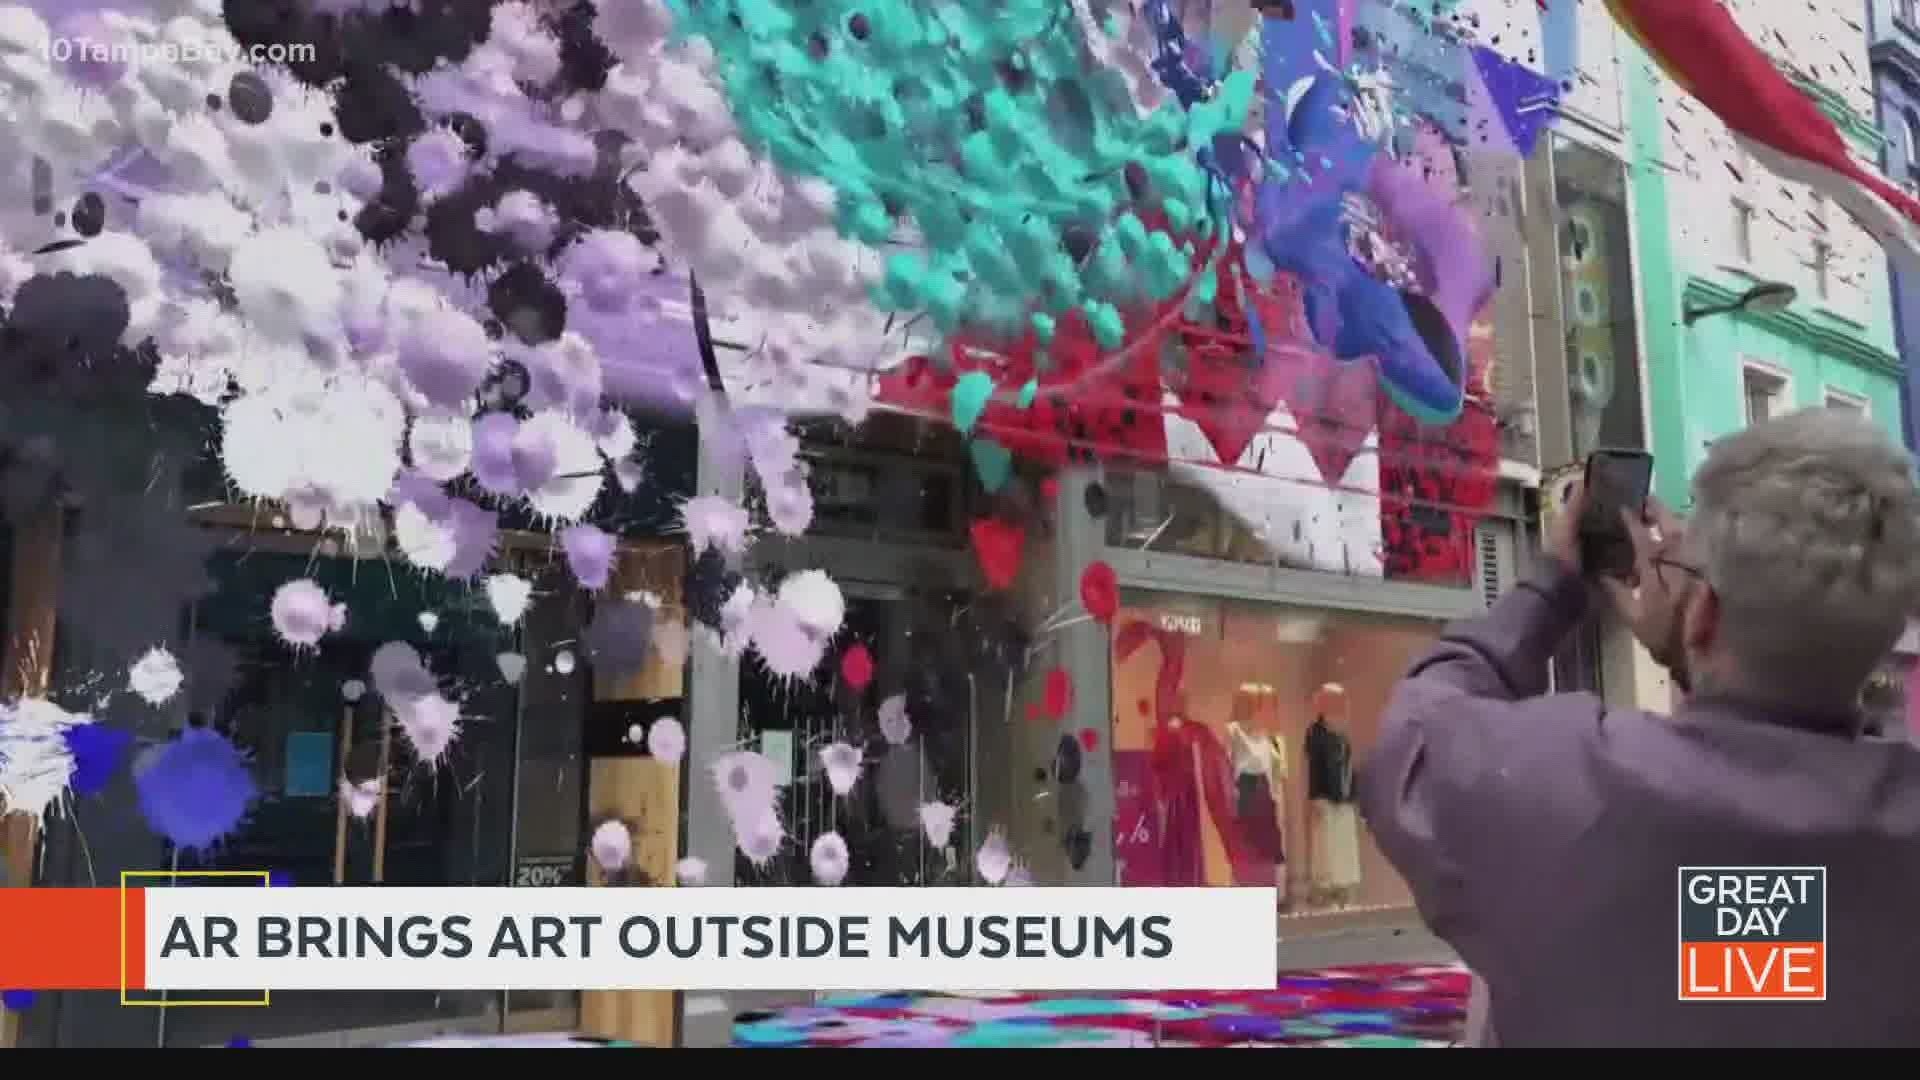 Snapchat bringing art outside museums through augmented reality